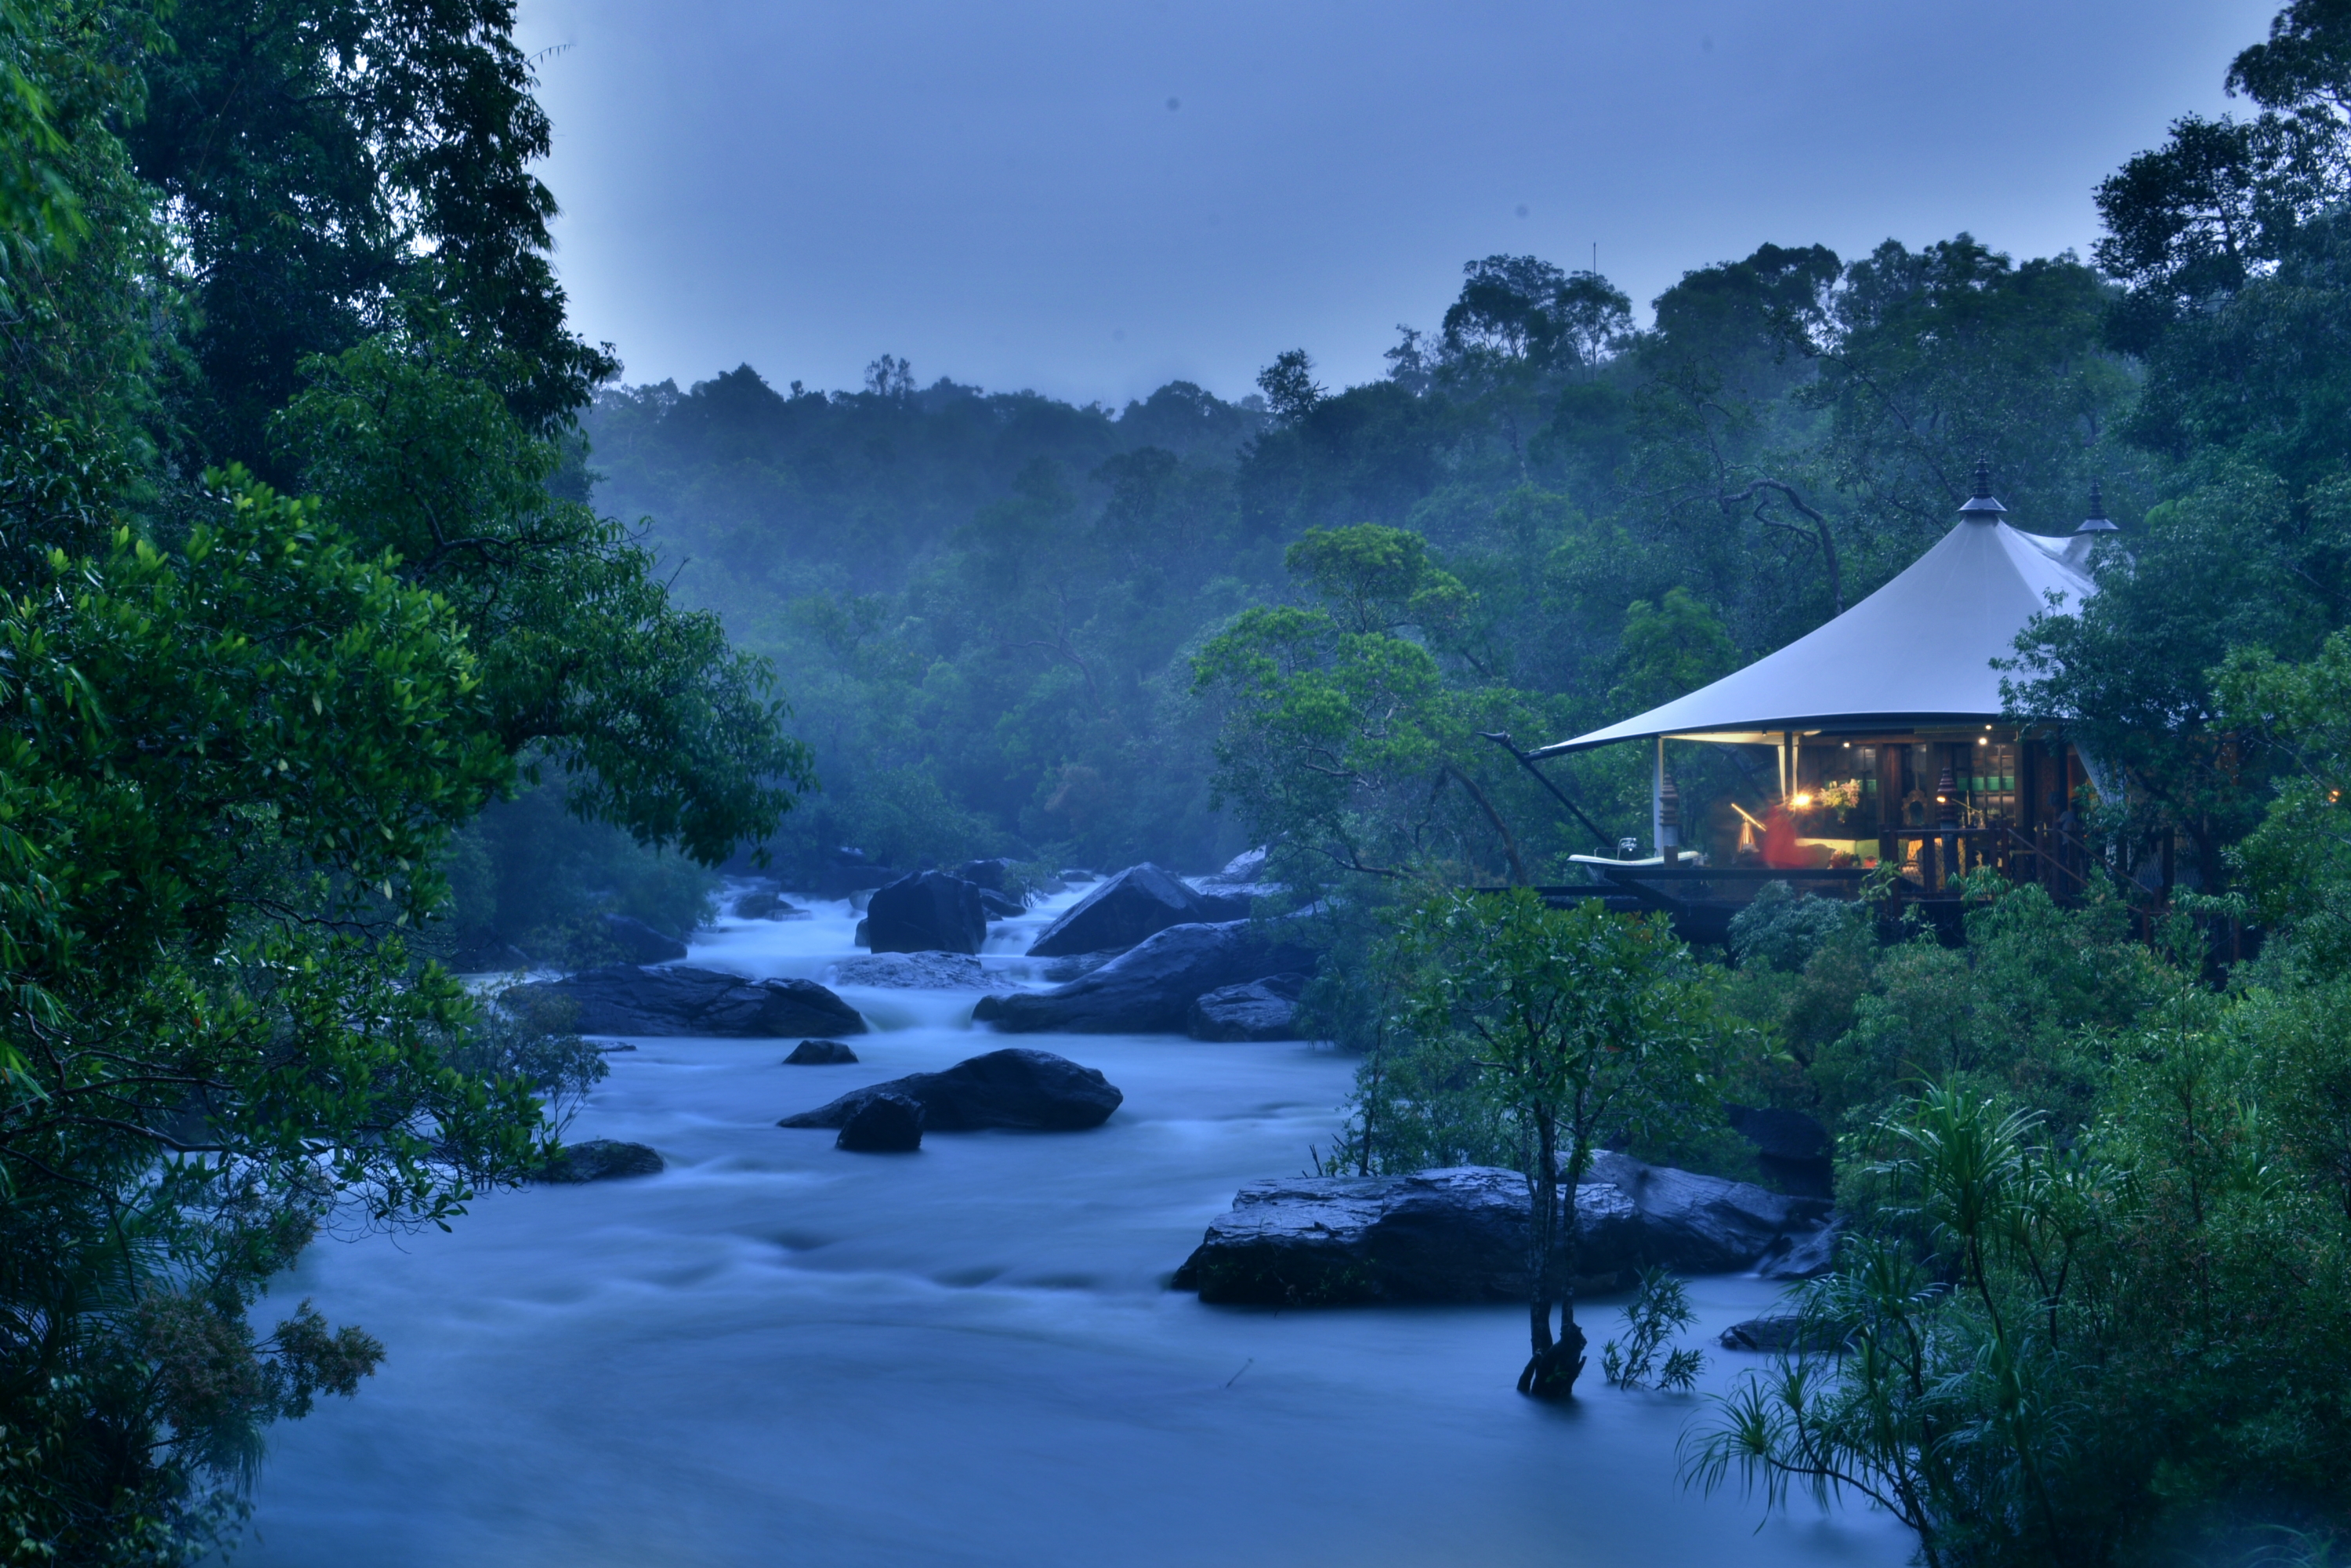 Perched over 1.5km of river and waterfalls, the 14 one-bedroom tents (100sqm) and one two-bedroom tent (140sqm) have been designed to evoke Bensley’s vision of what it might have been like to be on a luxury safari in the jungles of Cambodia with Jacky O’, who travelled throughout the Kingdom with King Sihanouk in 1967. Click to enlarge.